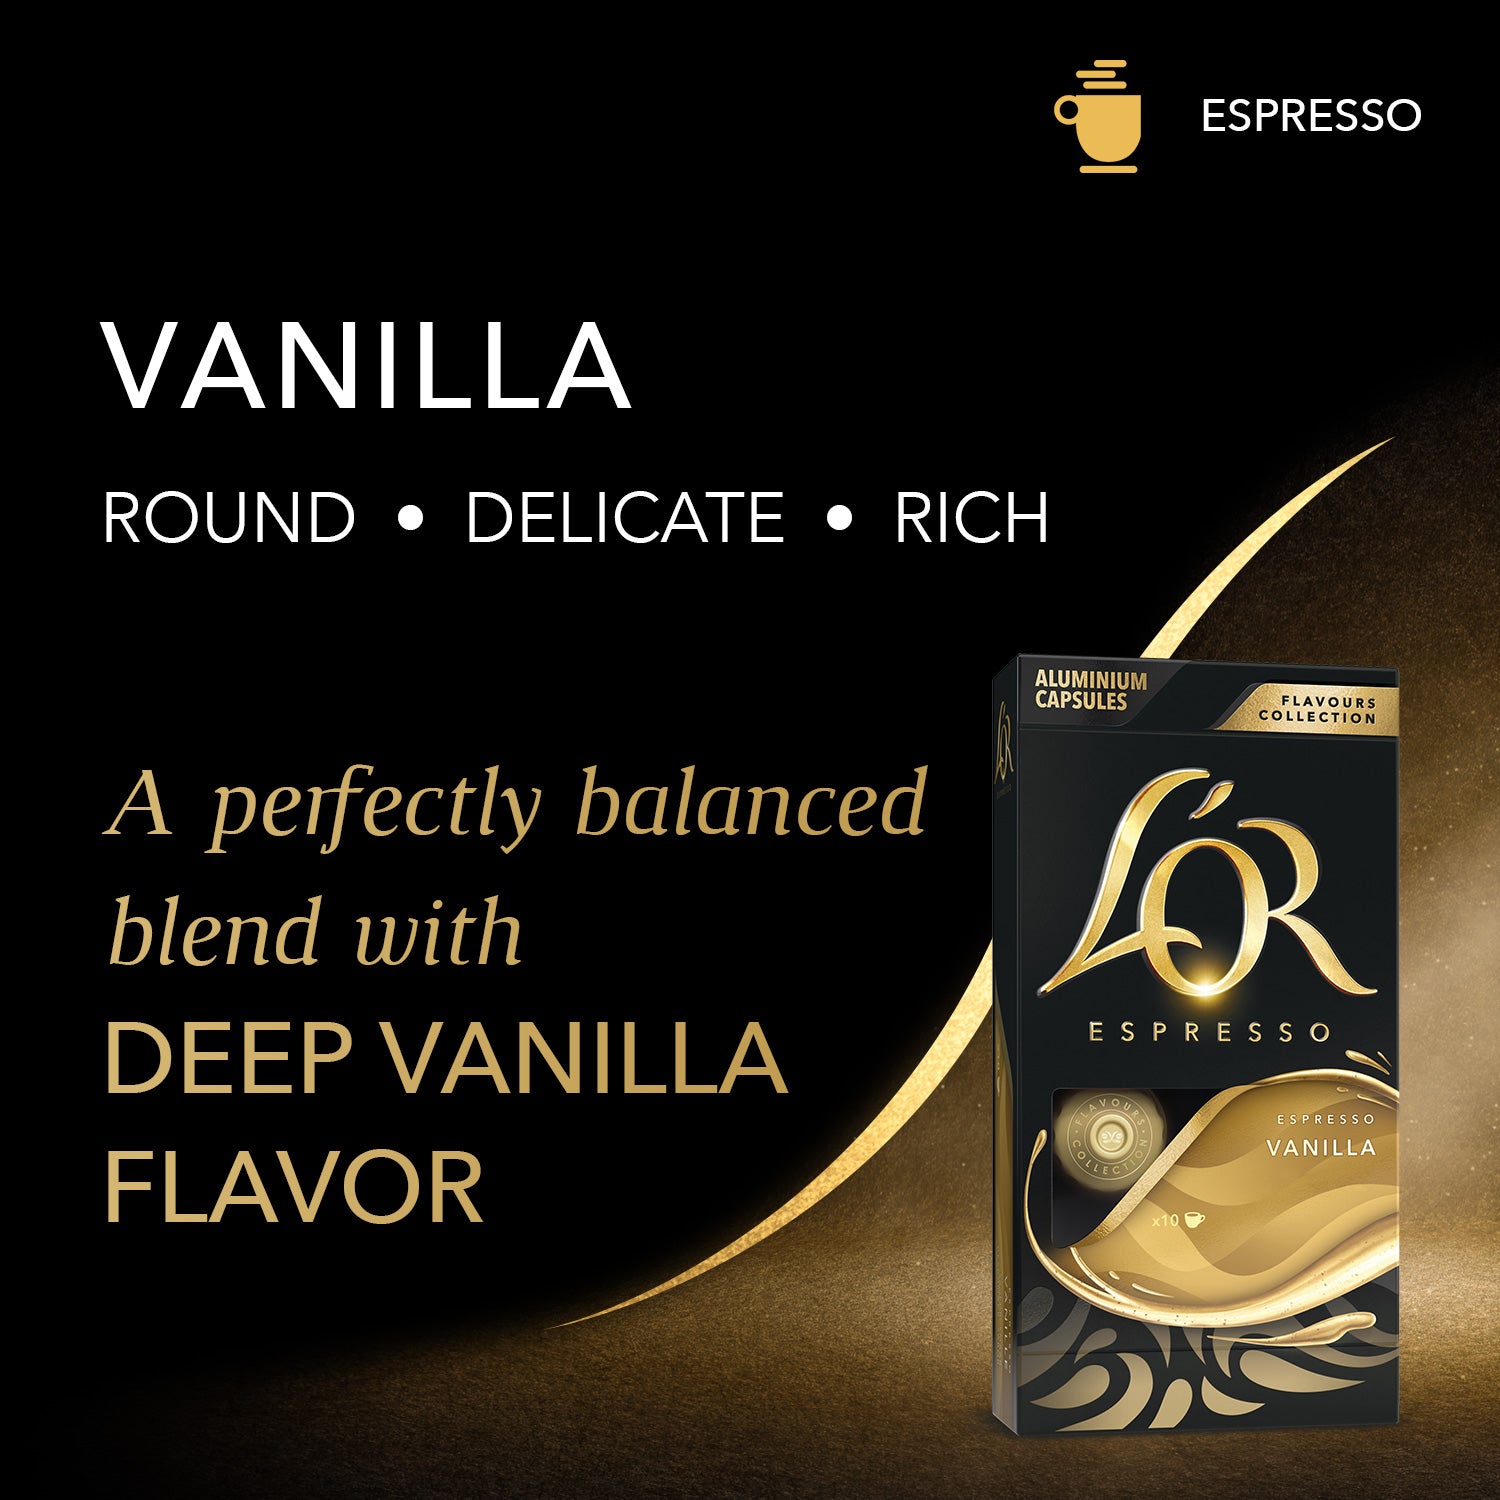 A perfectly balanced blend with deep vanilla flavor.